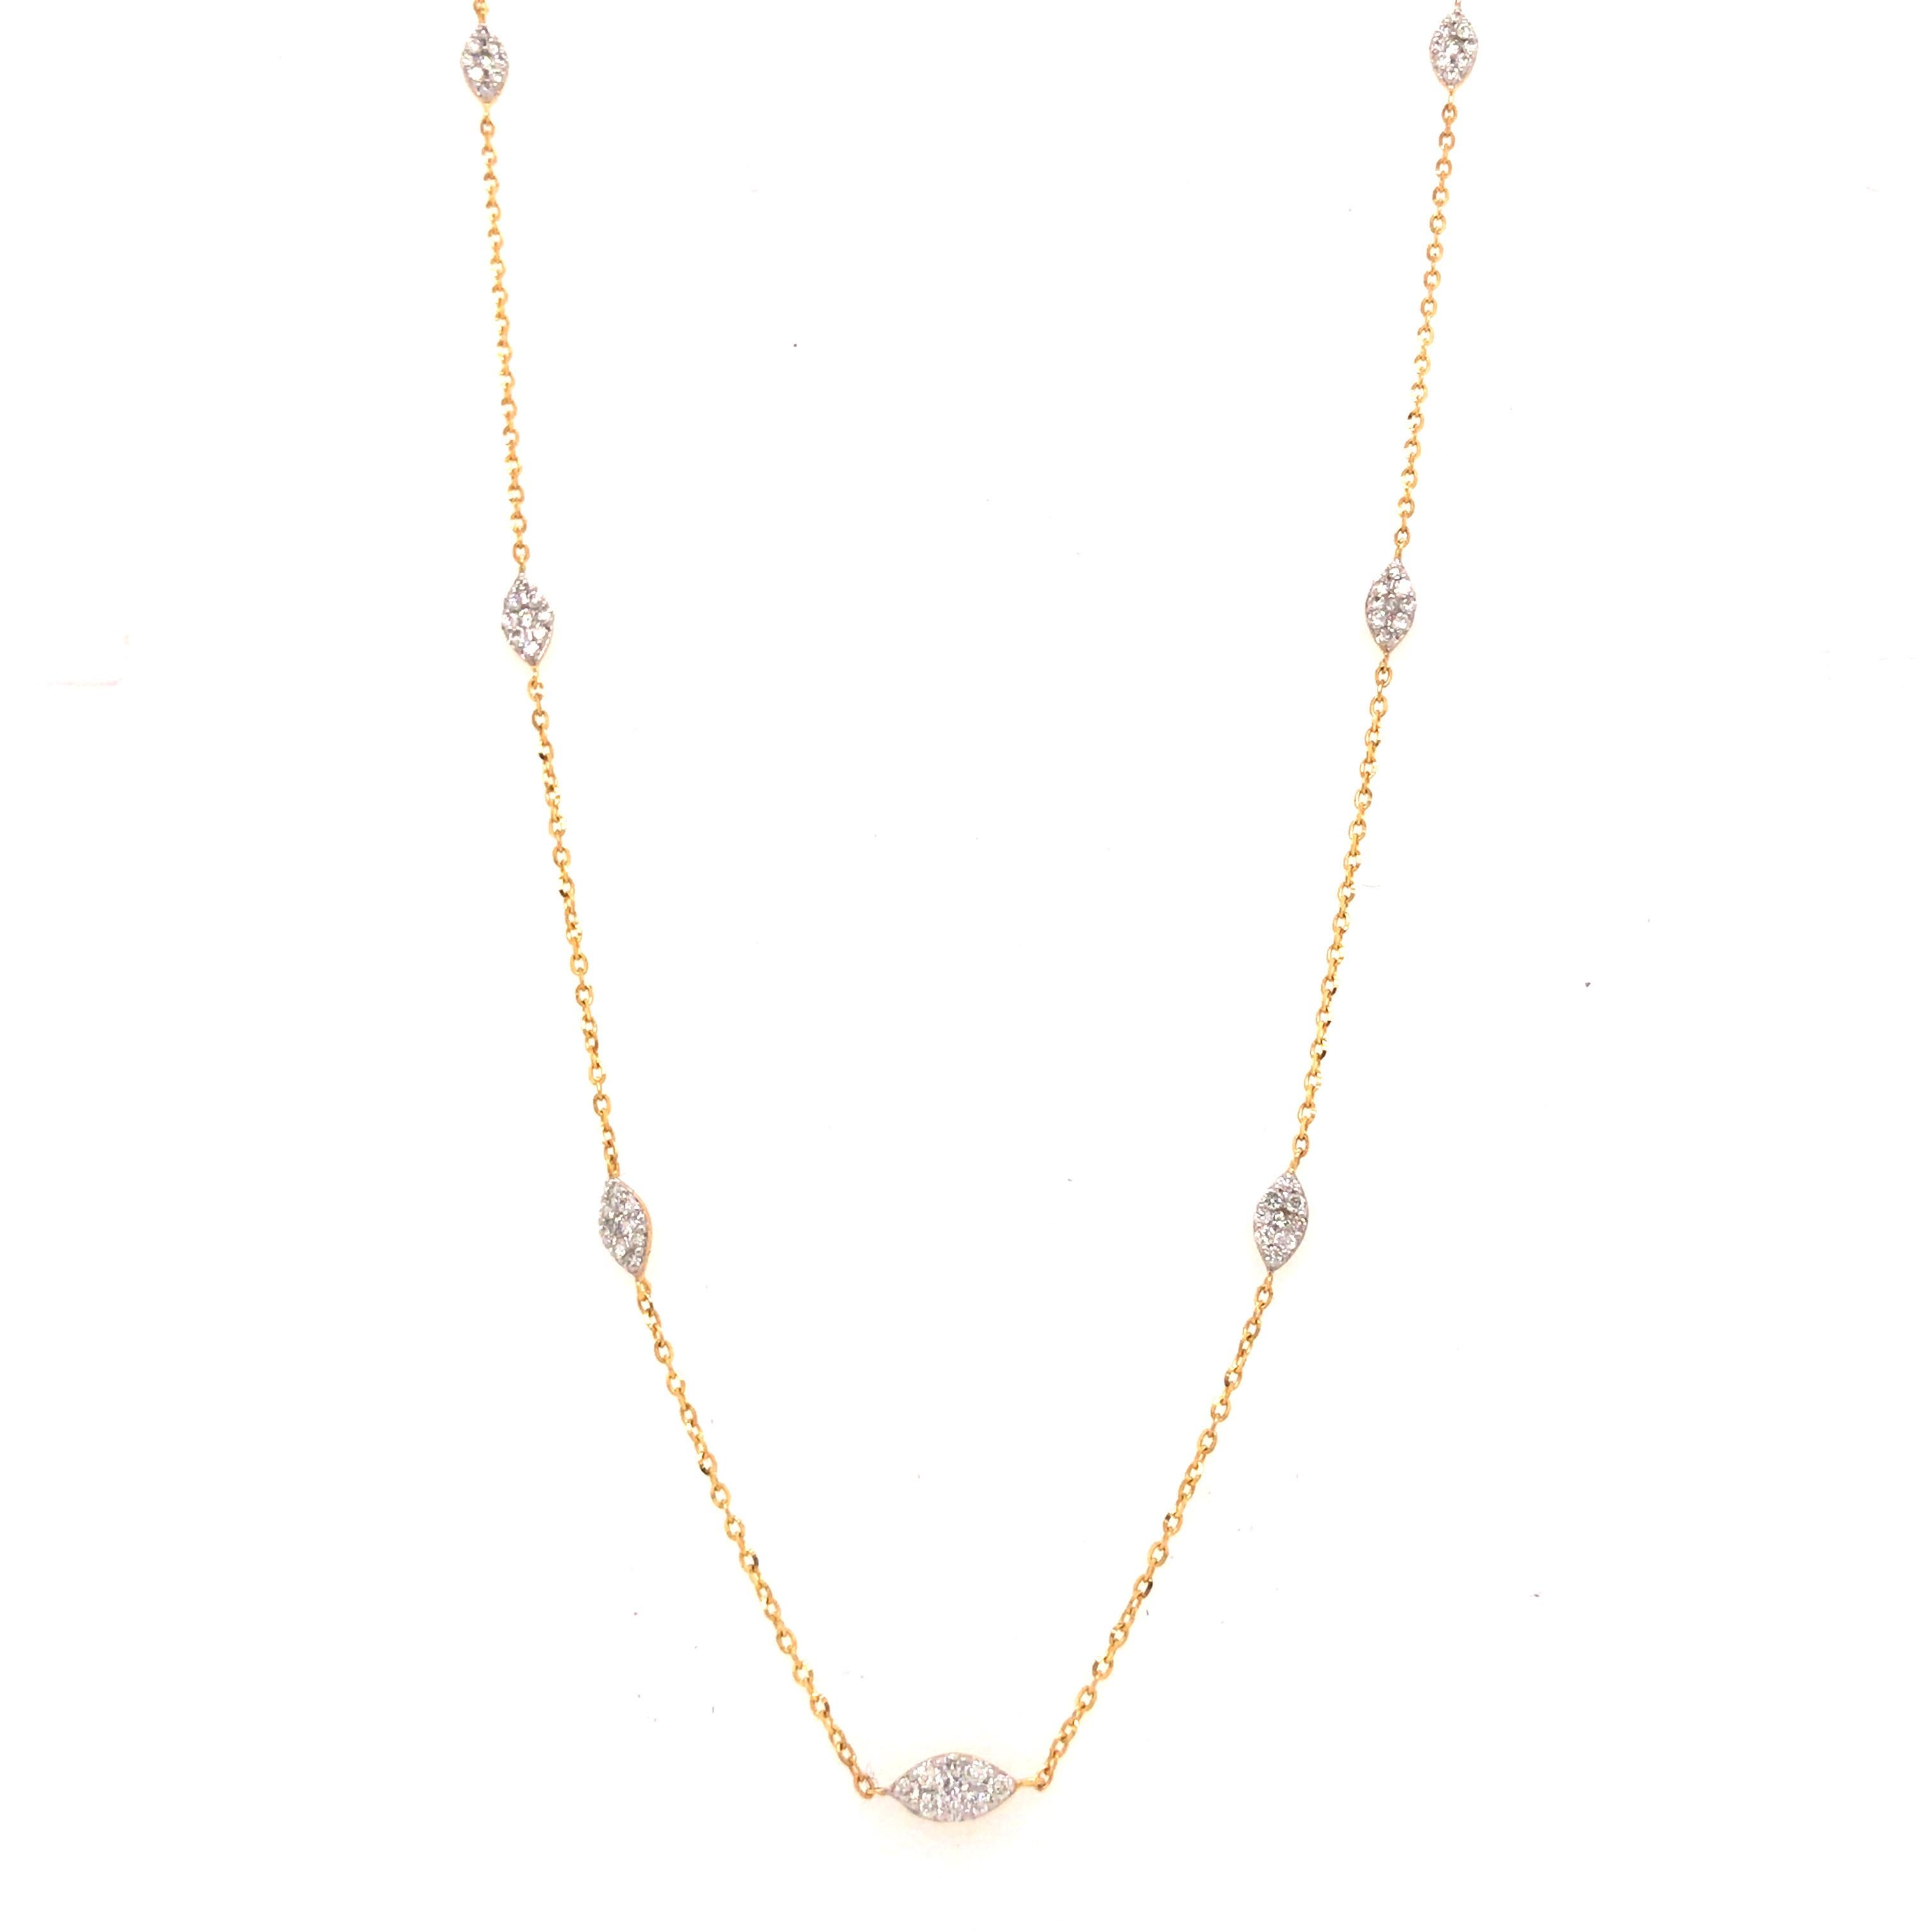 Diamond Pave Station Necklace in 14K Yellow Gold.  Round Brilliant Cut Diamonds weighing 0.33 carat total weight, G-H in color and VS-SI in clarity are expertly set in (7) stations.  The Necklace is adjustable in length at 18 inch, 17 inch or 16